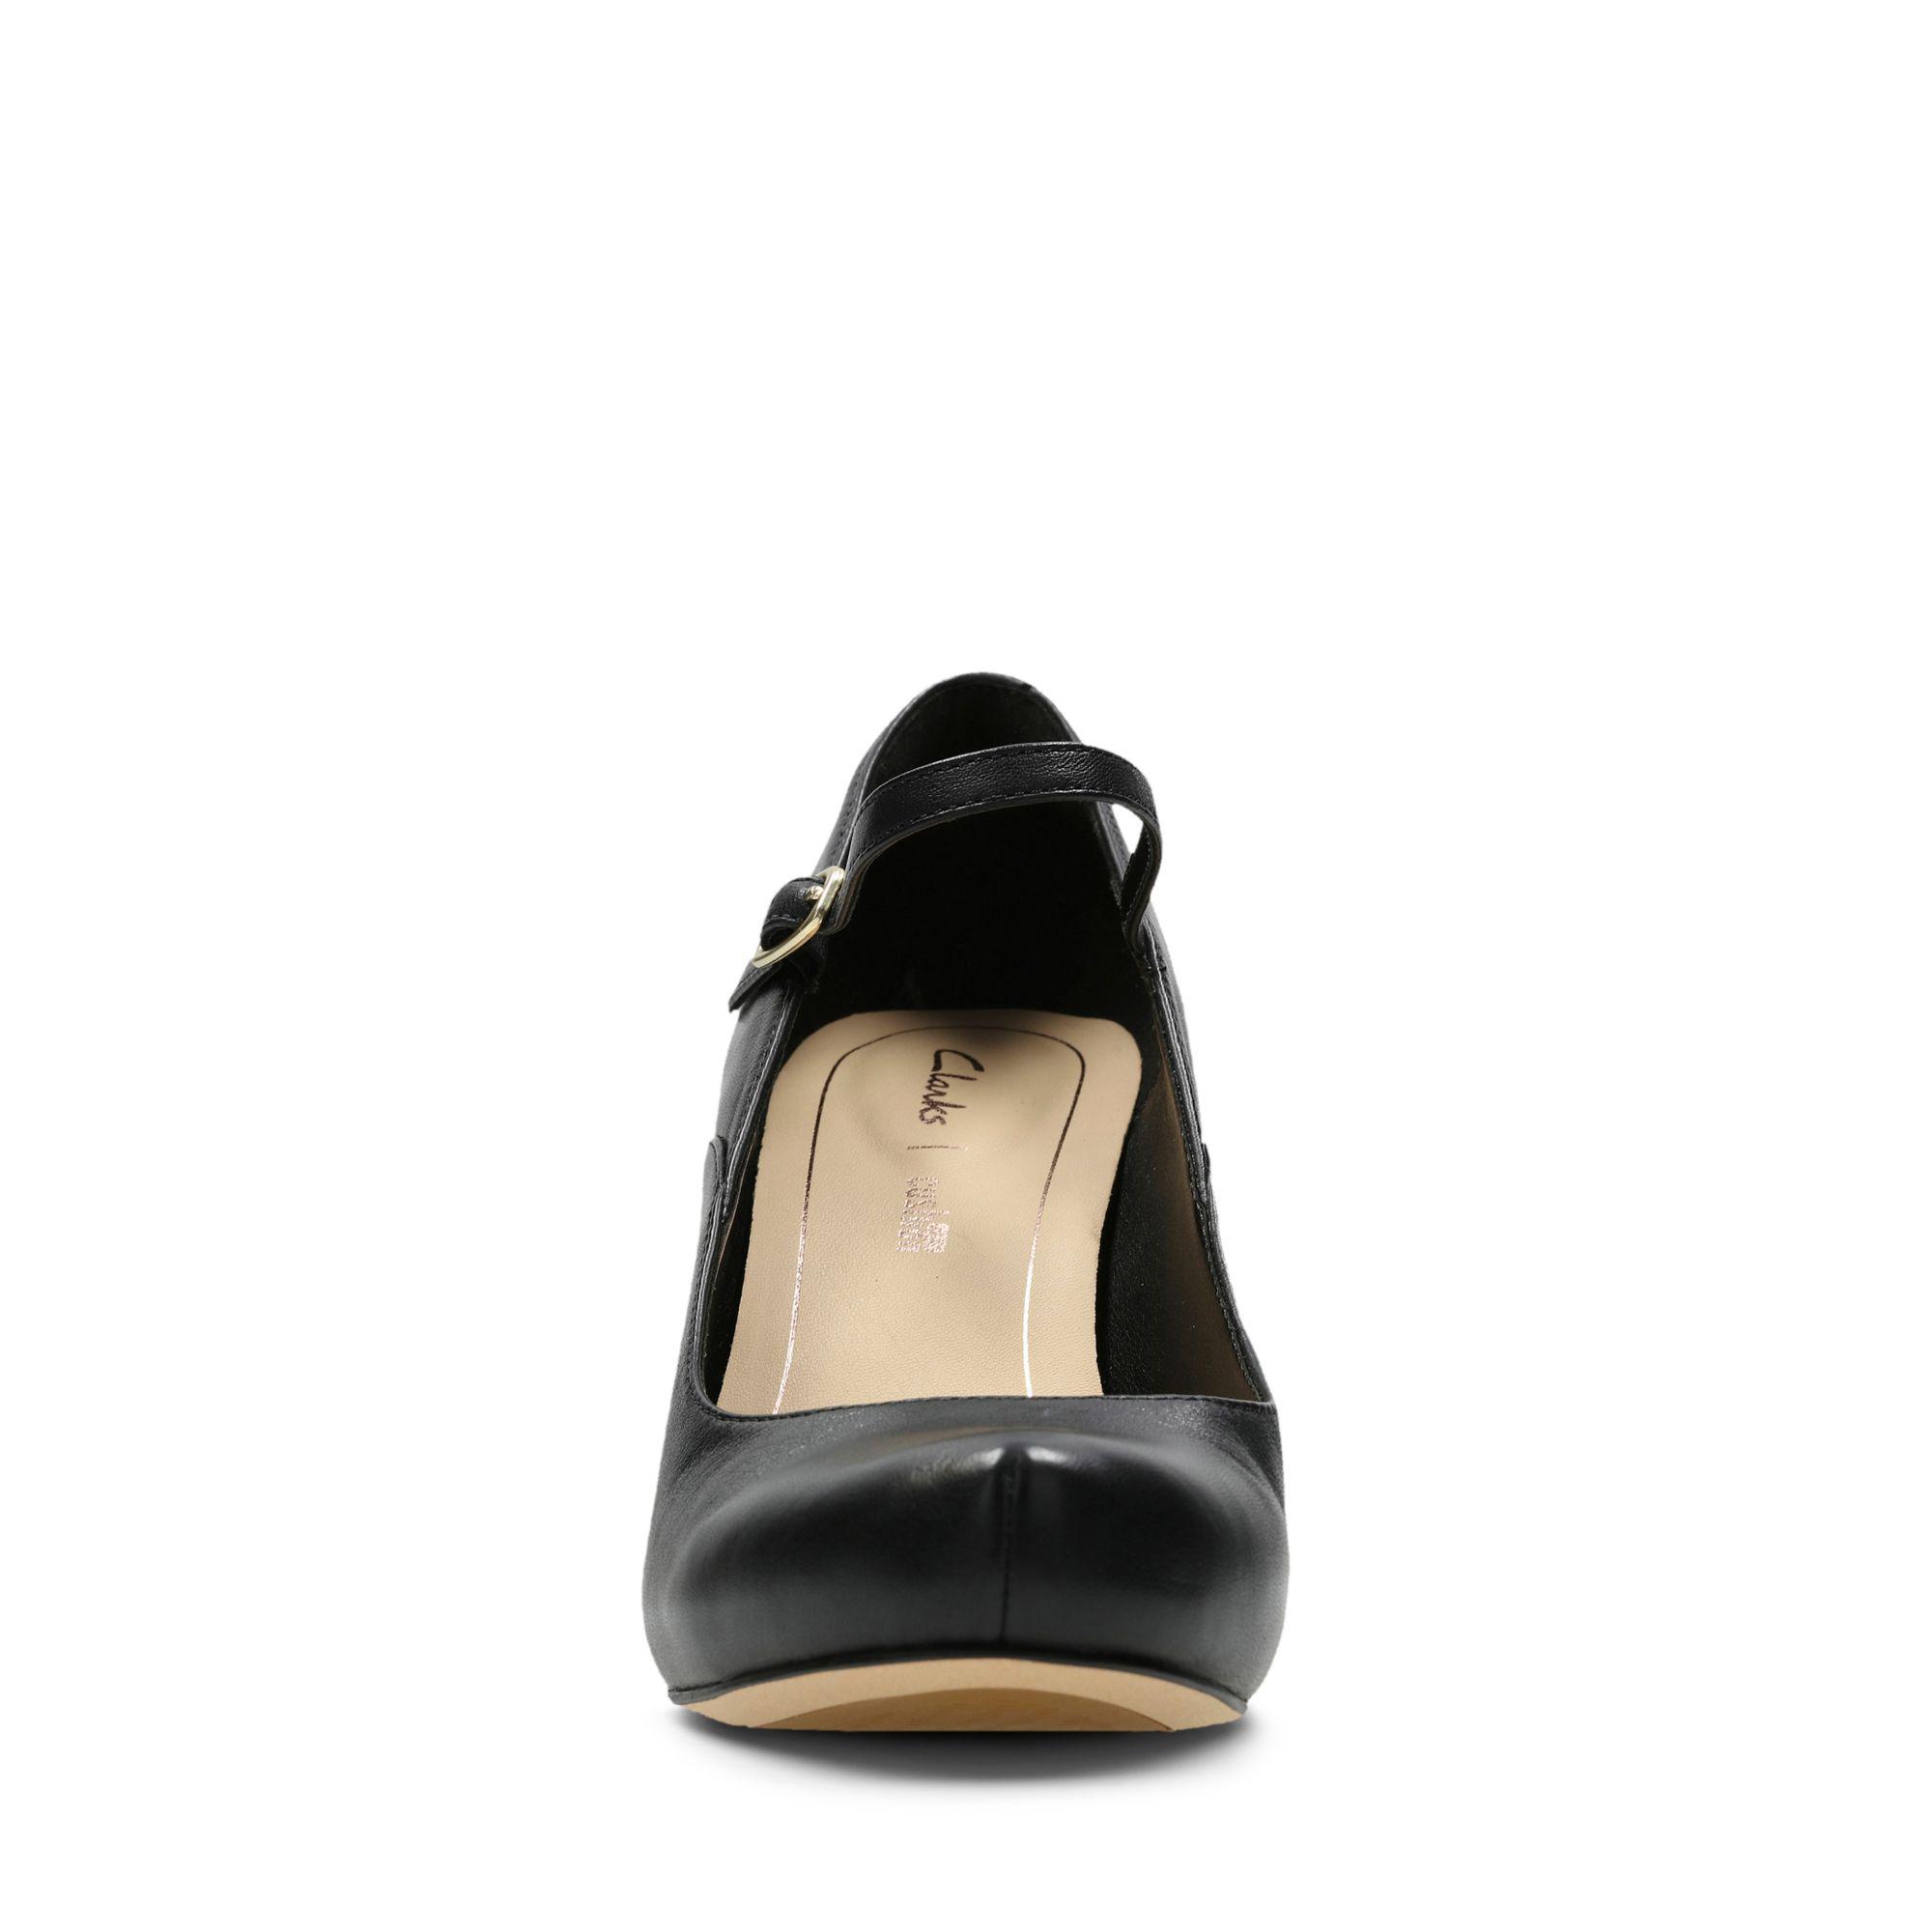 Clarks Leather Dalia Lily in Black Leather (Black) - Lyst